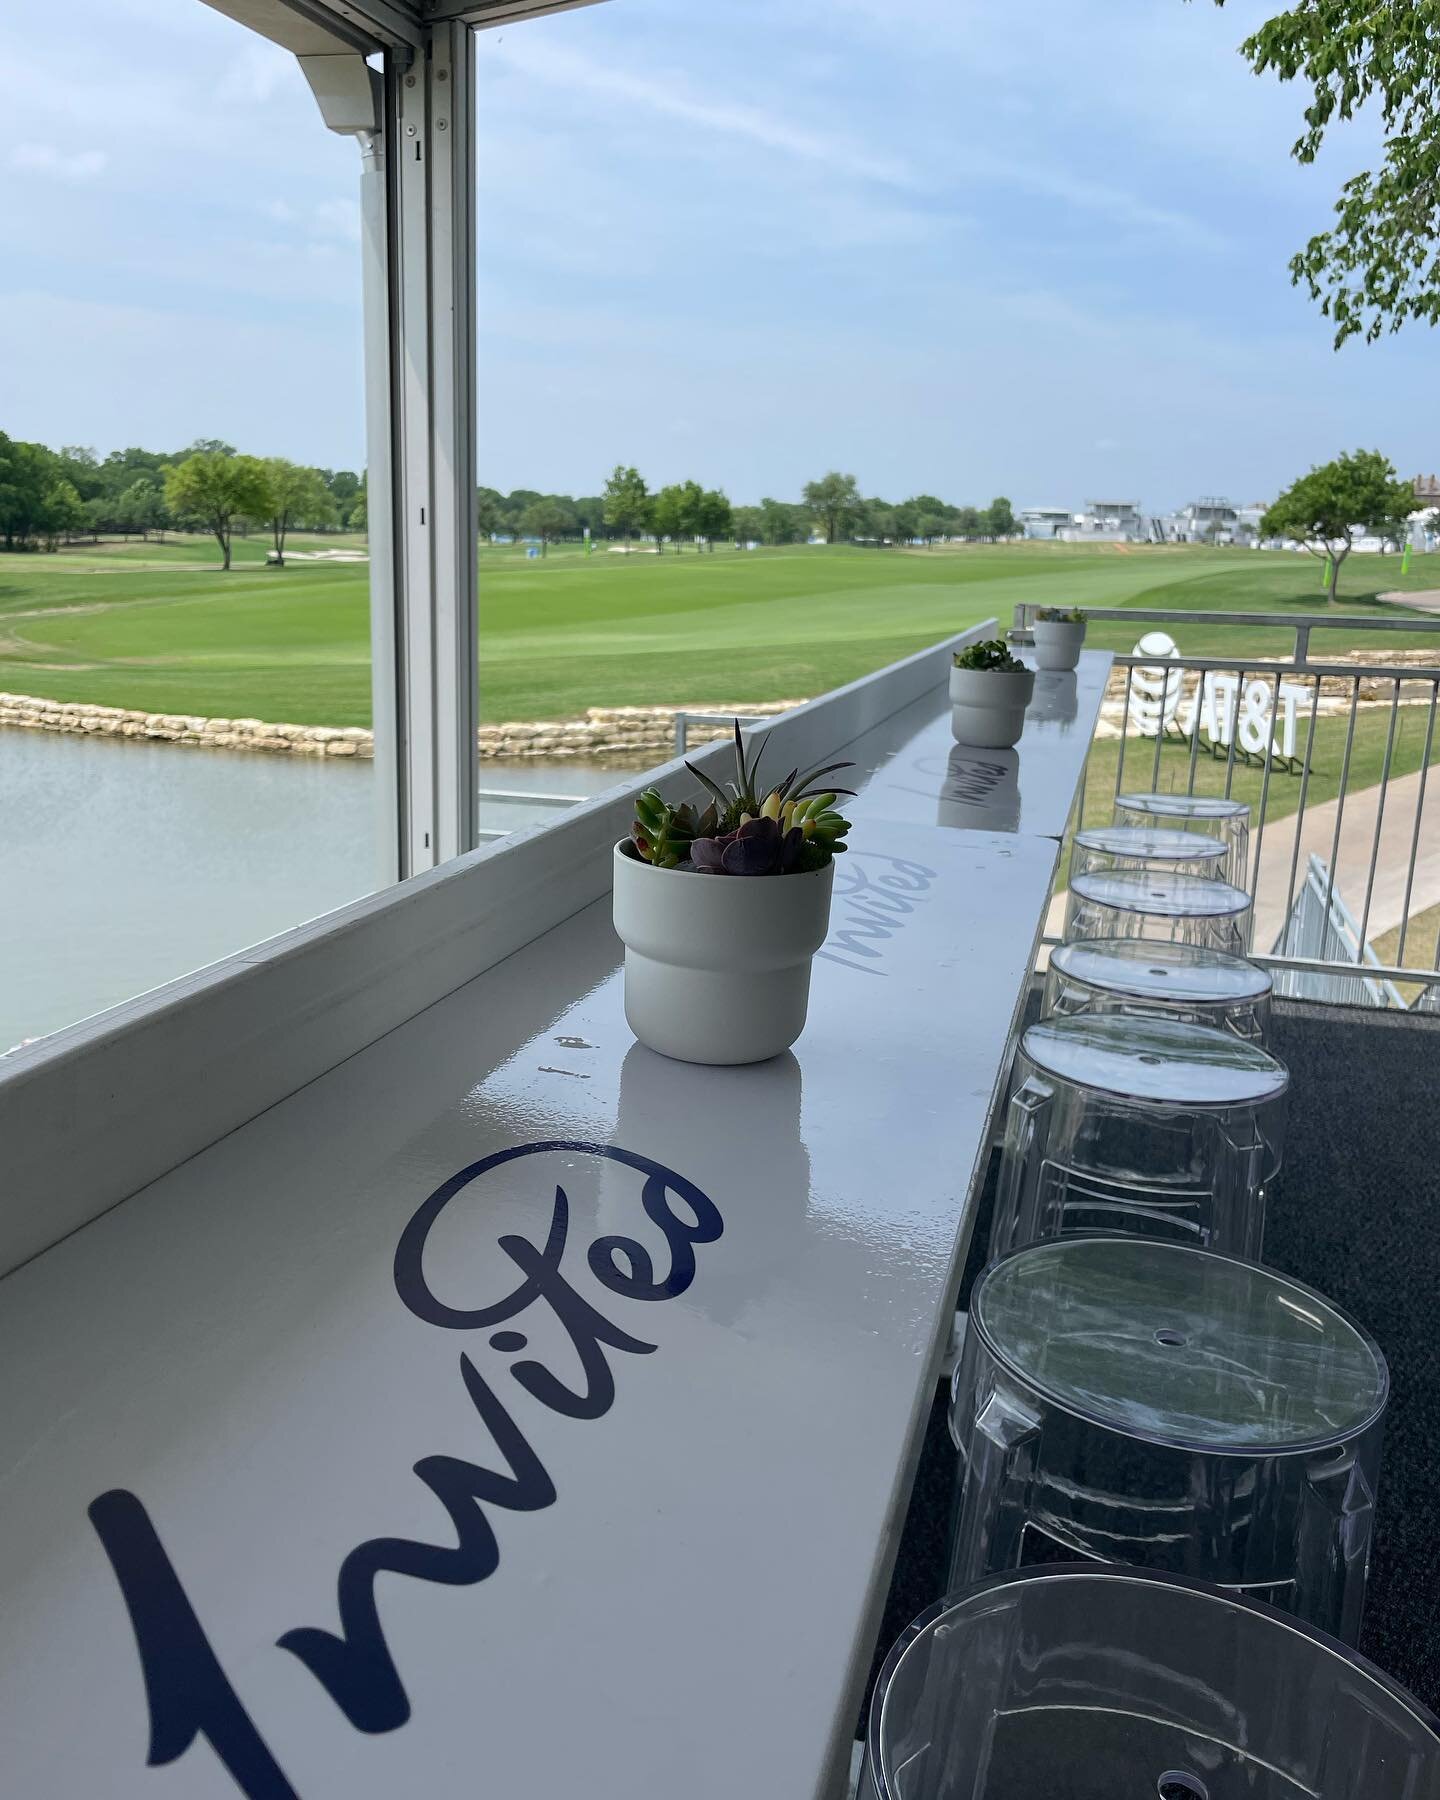 Sneak peek at the VIP In it&rsquo;s tent on the 18th green @attbyronnelson @tpccraigranch